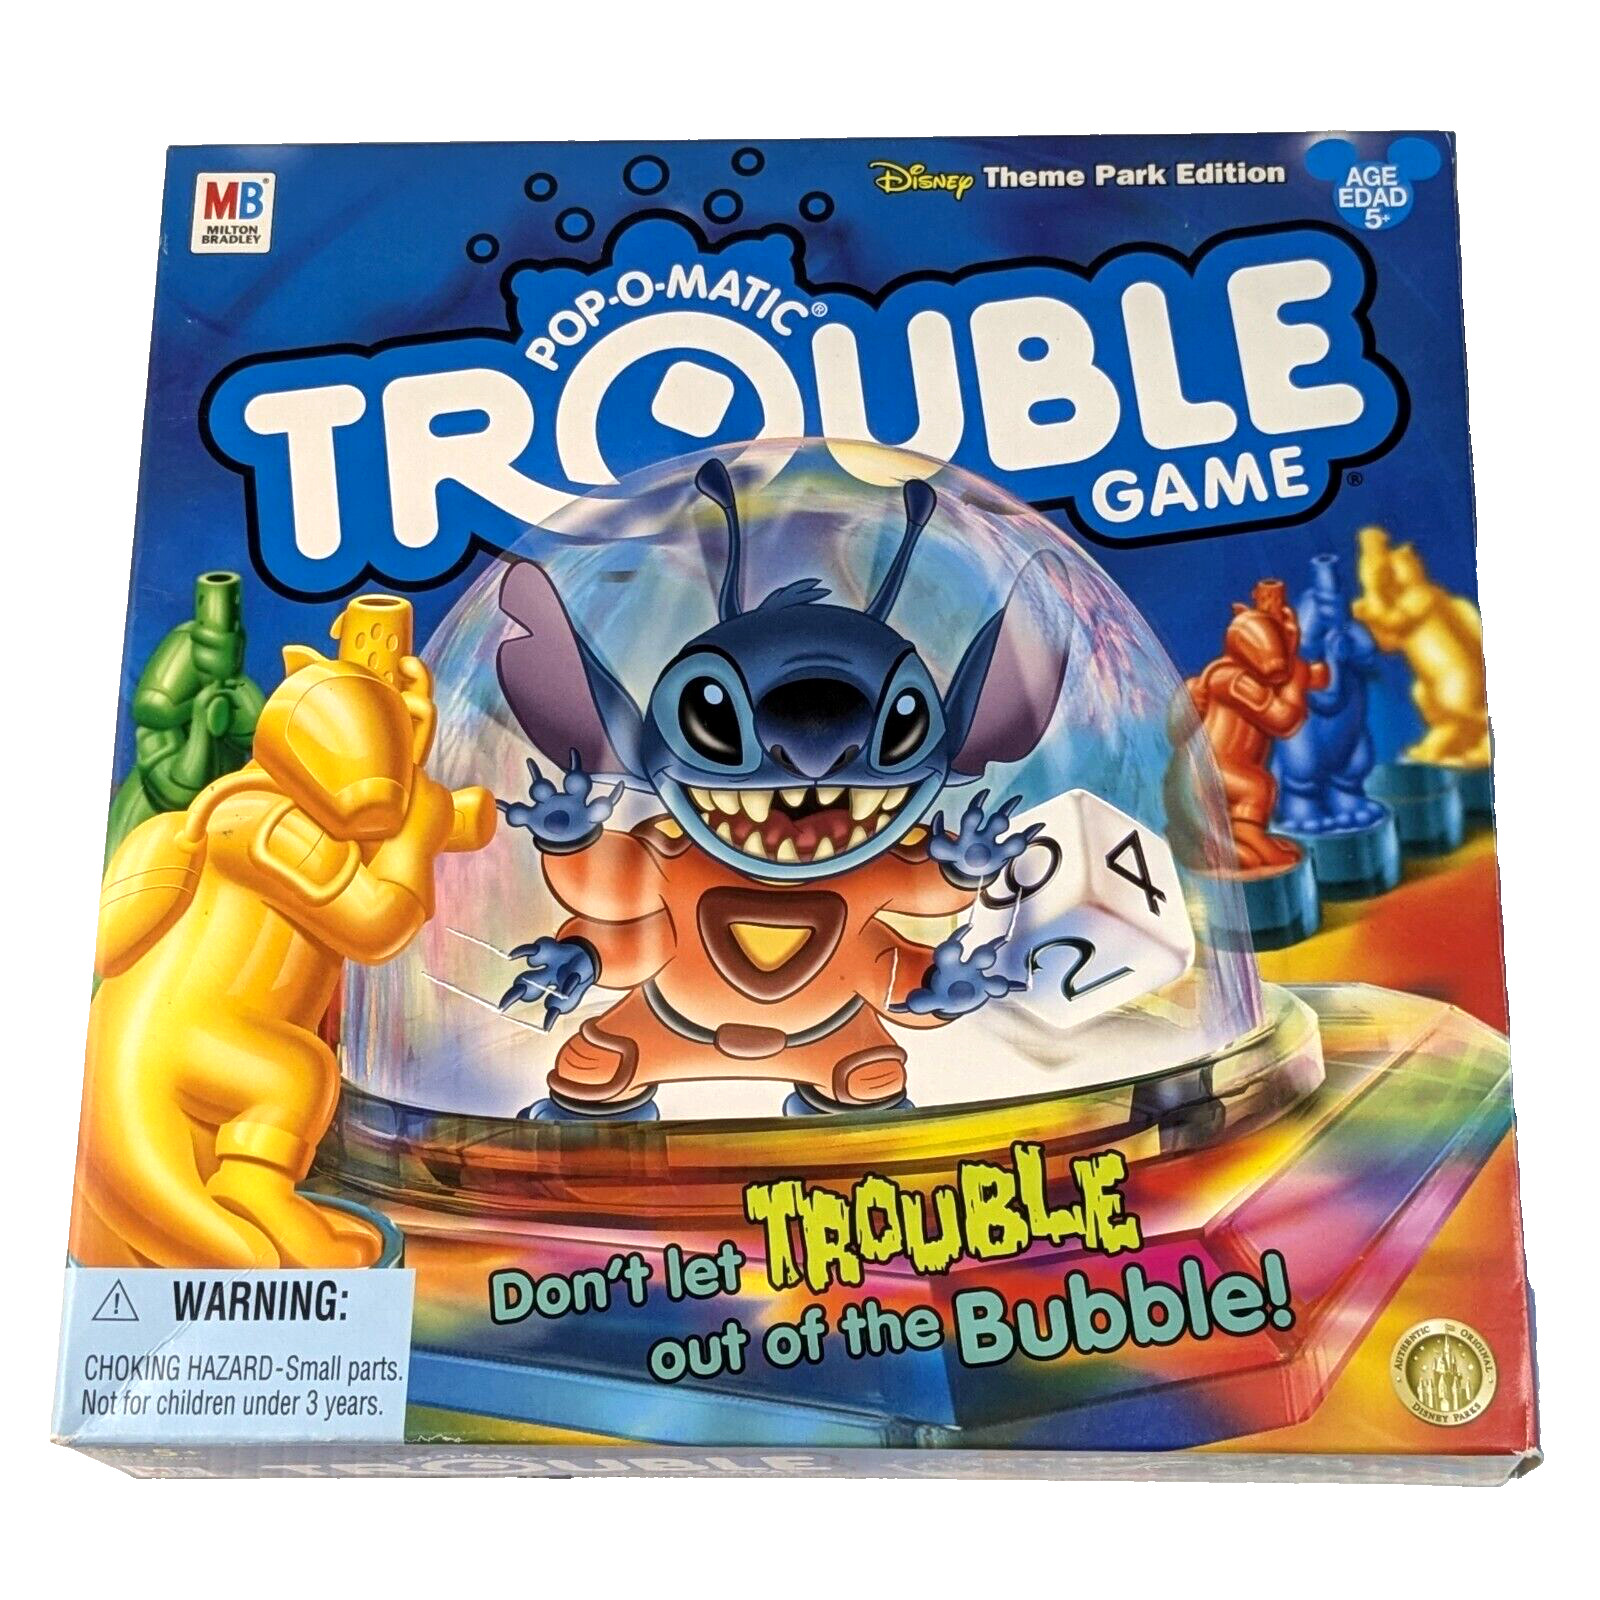 RARE Disney Theme Park Edition Stitch Trouble Game Hard to Find 100% Complete